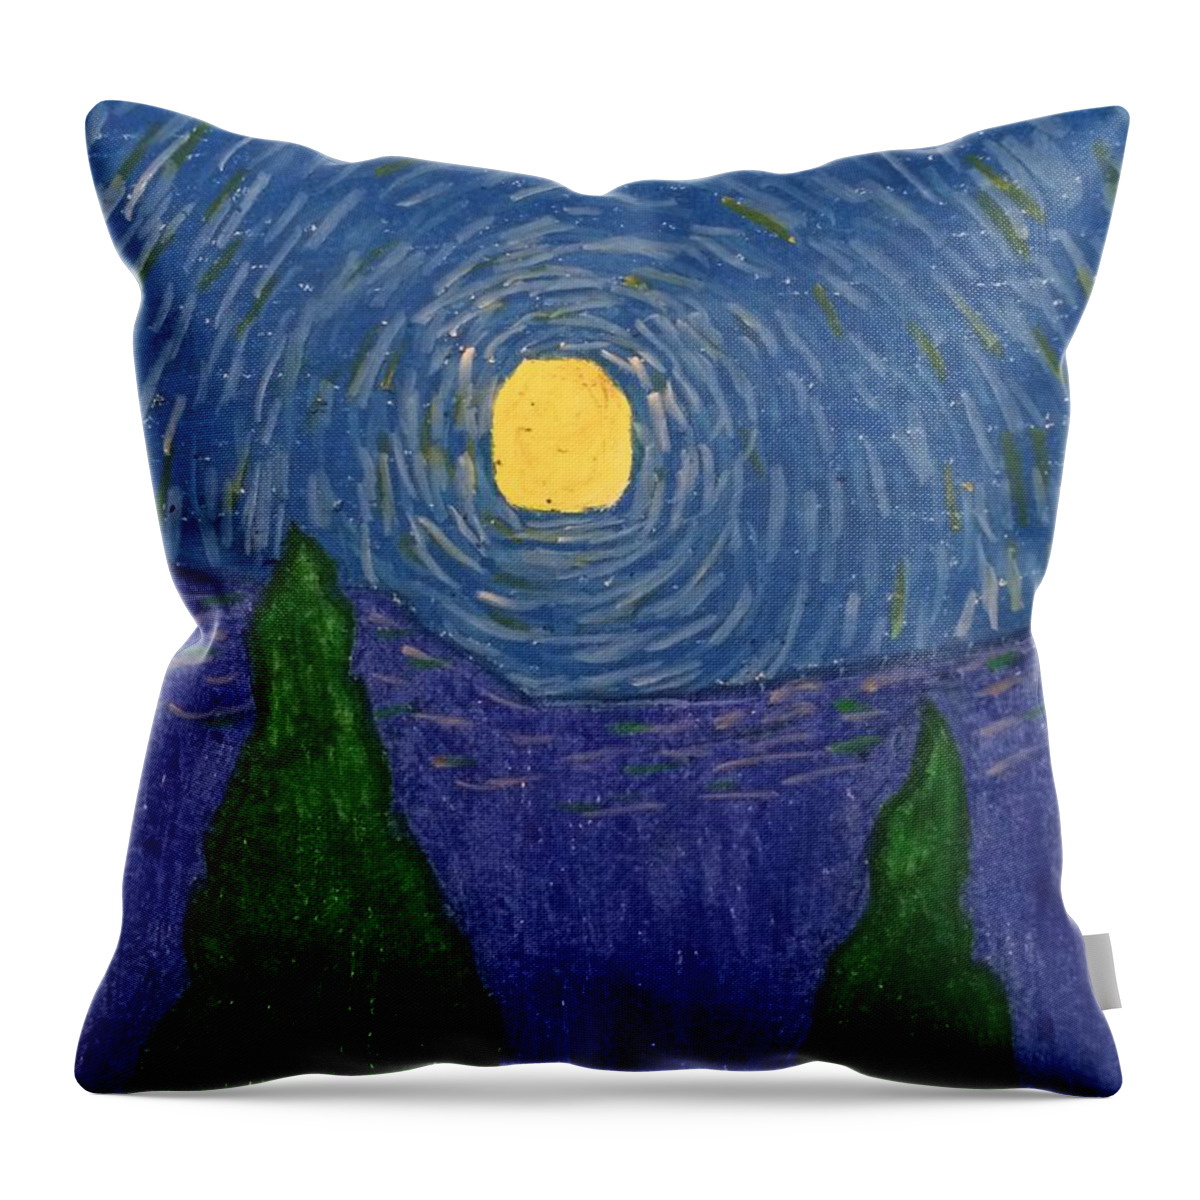 Sky Throw Pillow featuring the drawing Night Sky by Samantha Lusby